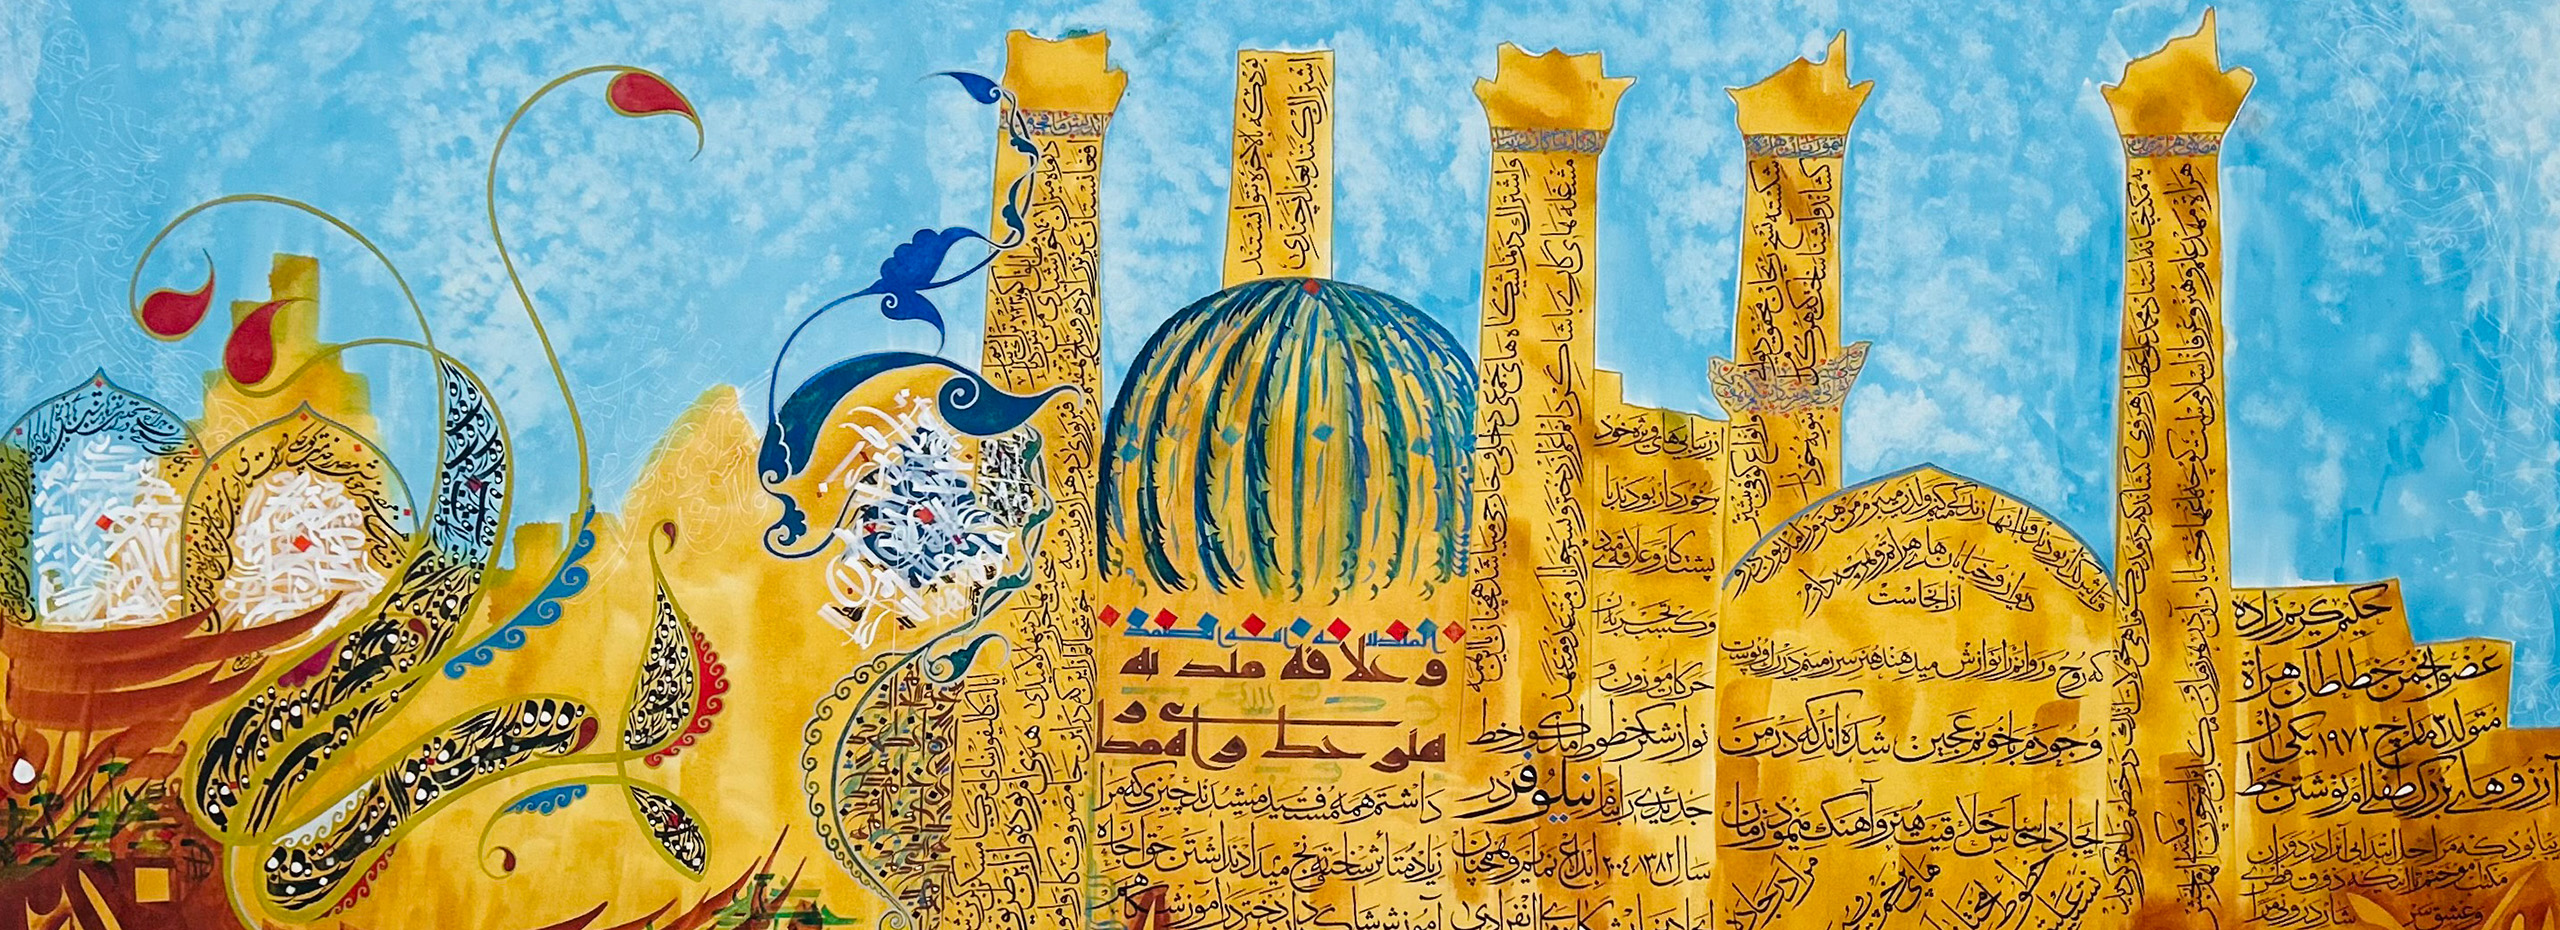 A colorful drawing with abstract forms and Arabic calligraphy